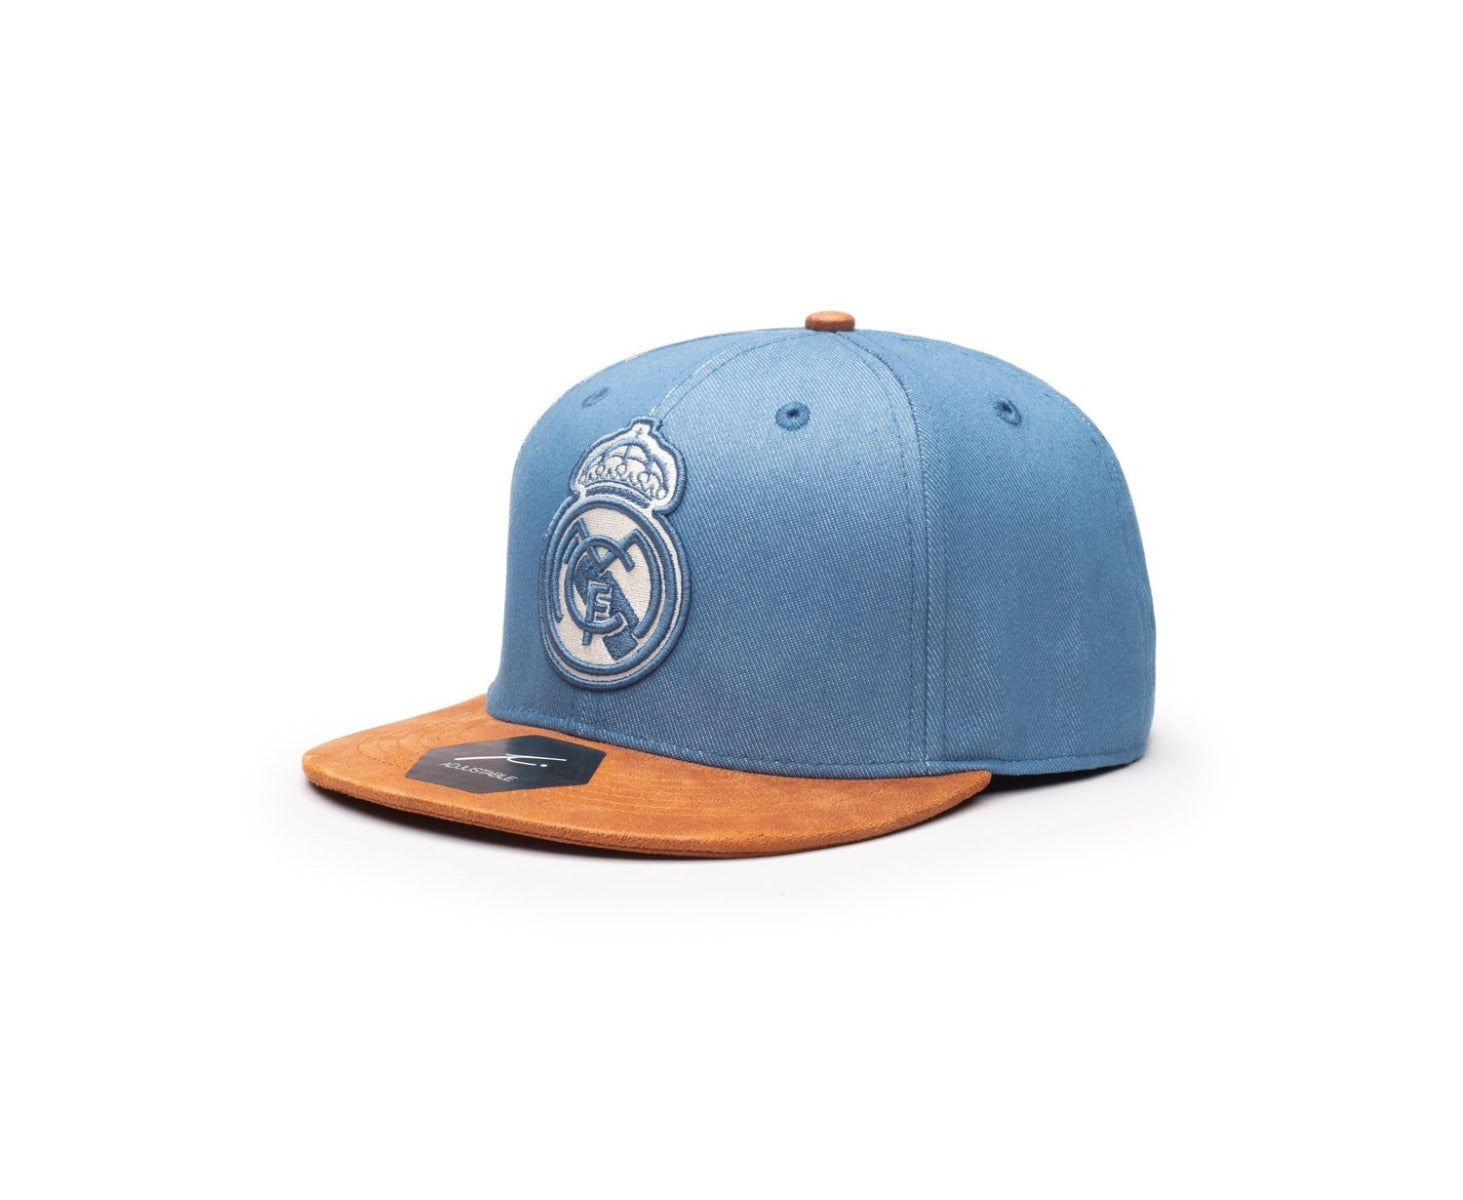 FI Collection Real Madrid Orion Snapback Hat - Light Blue-Brown